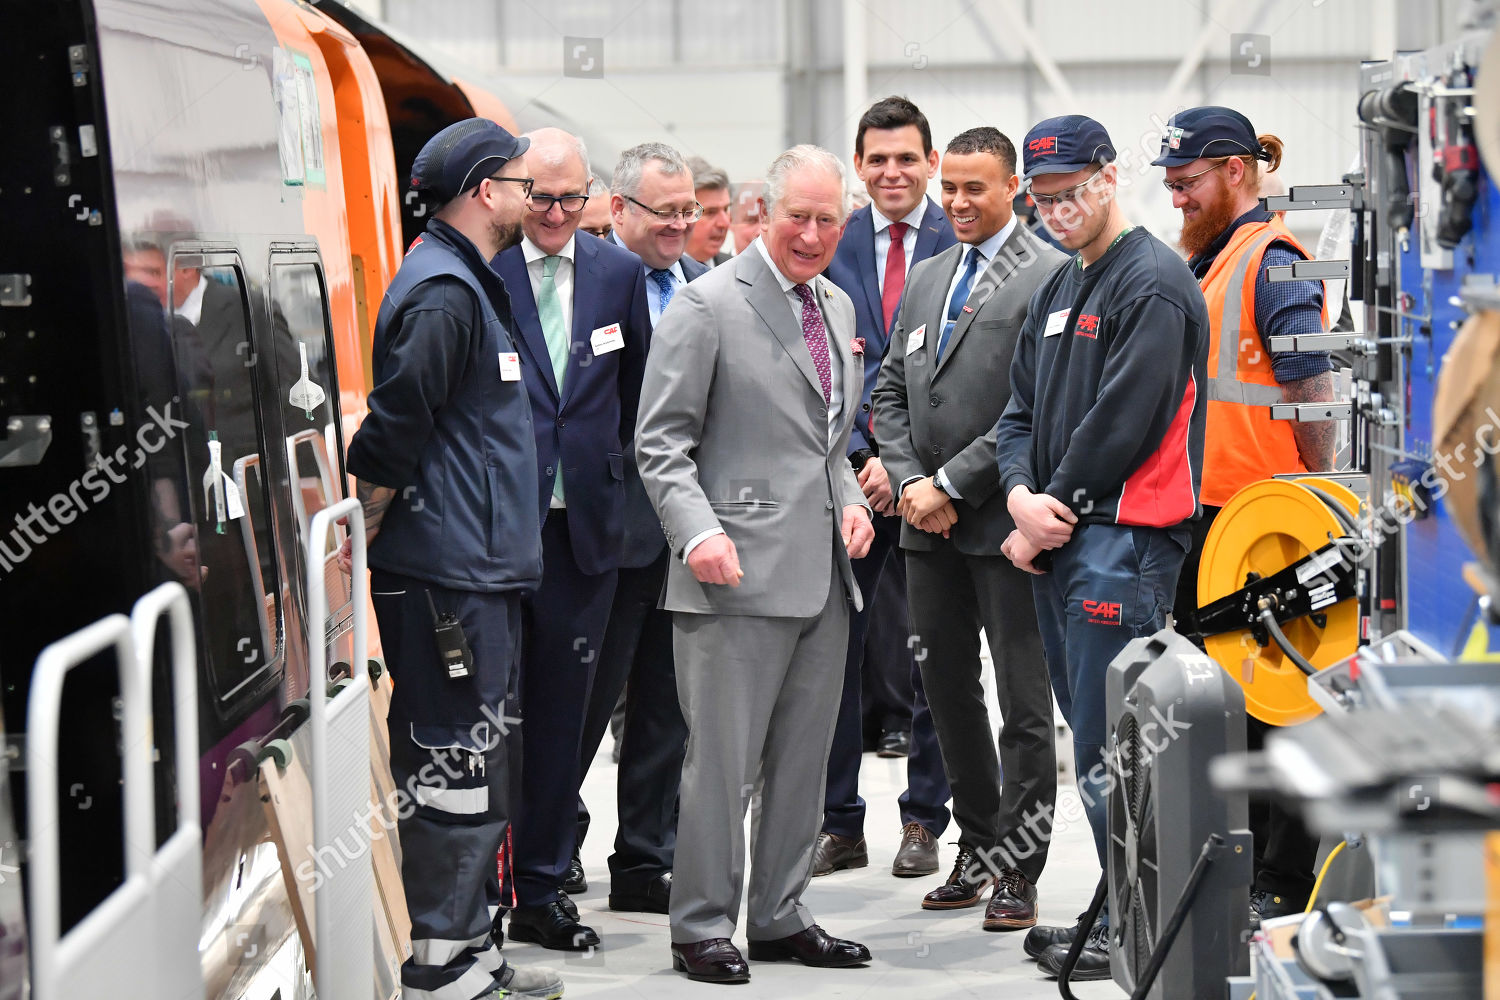 prince-charles-visit-to-south-wales-uk-shutterstock-editorial-10563131j.jpg